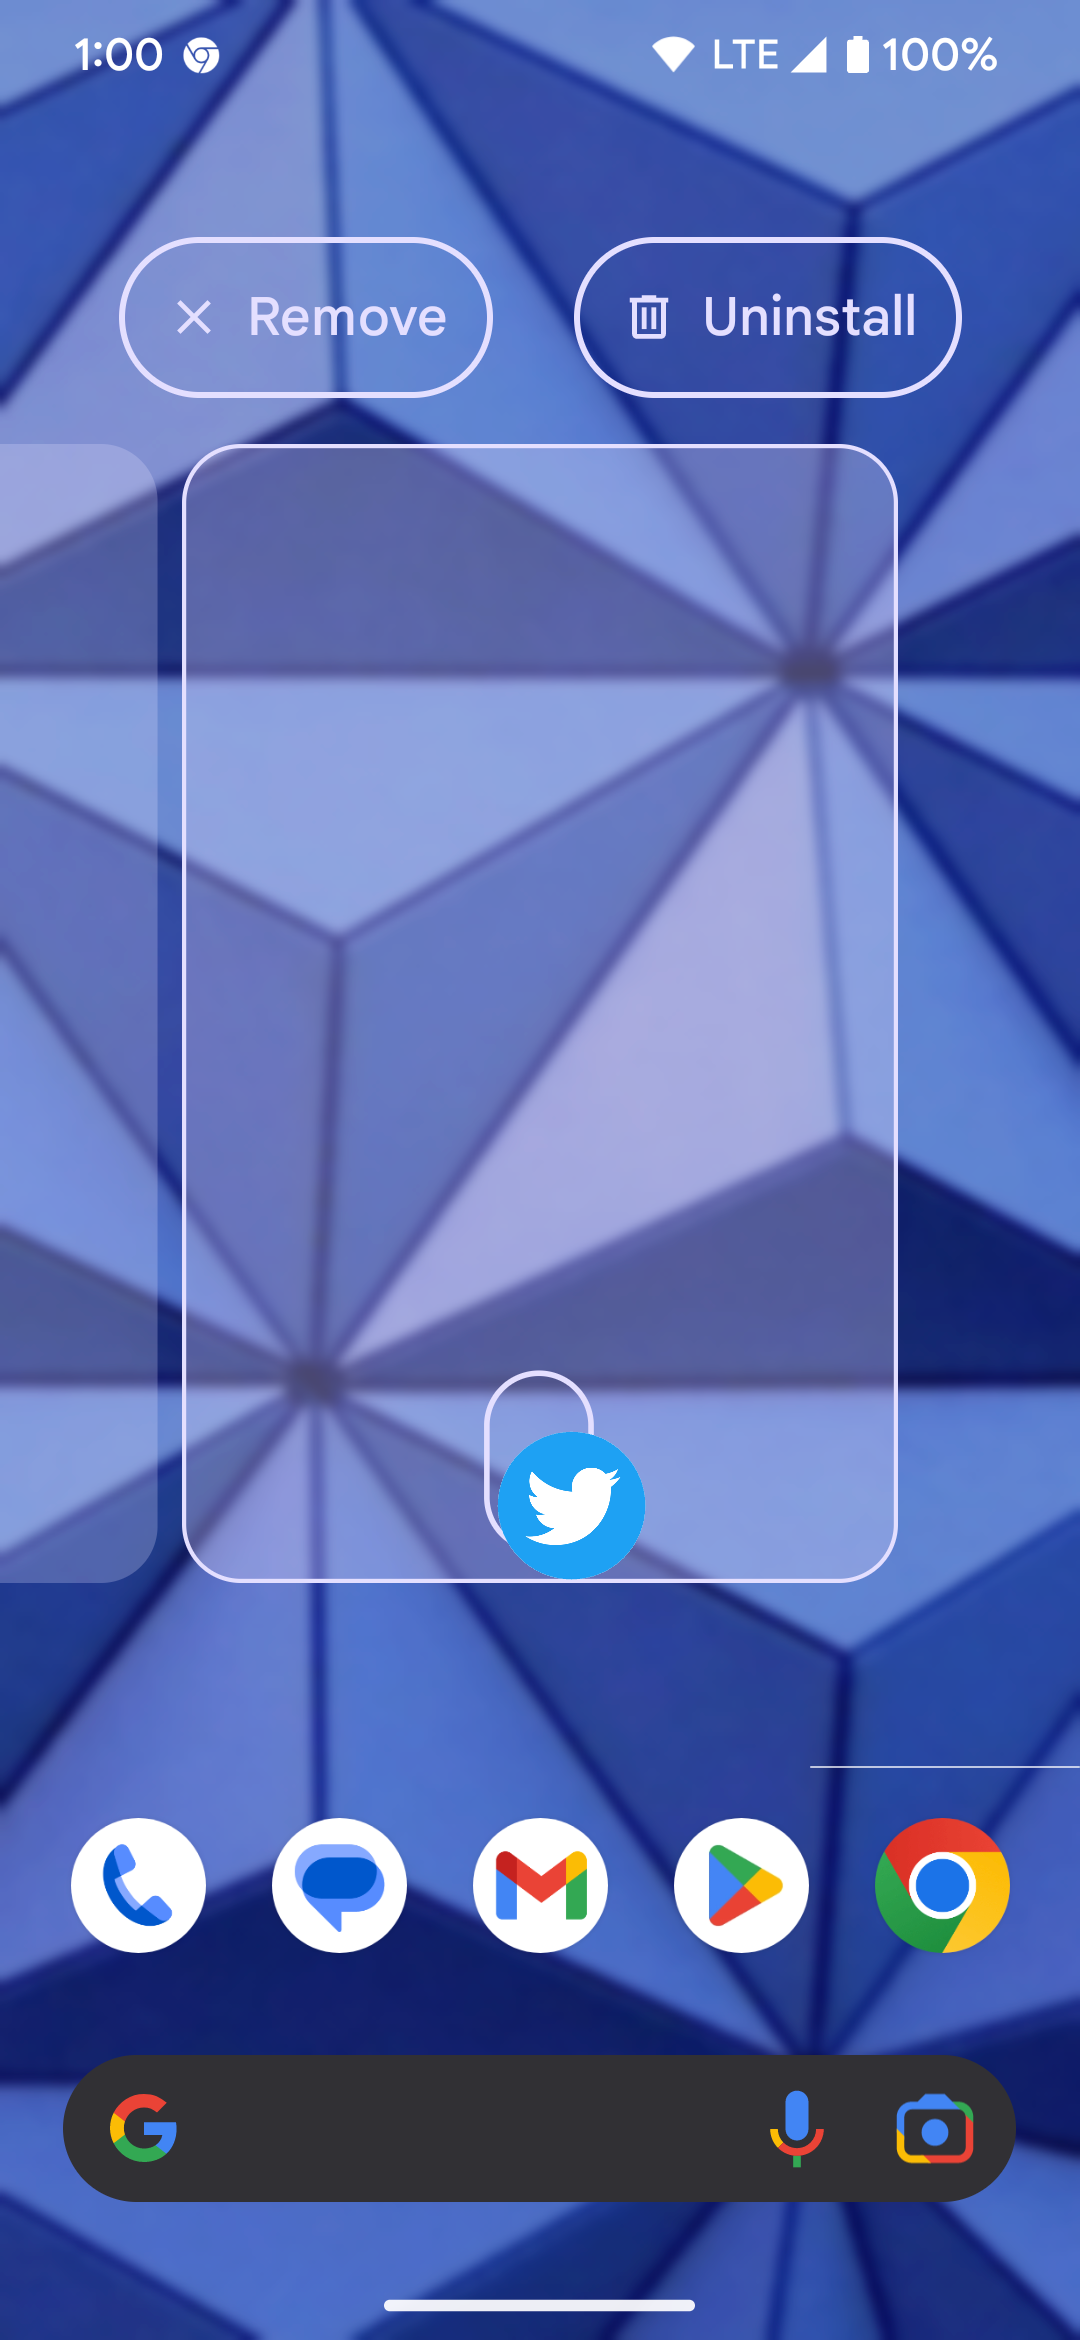 Dragging and dropping the Twitter web app icon shortcut onto the home screen